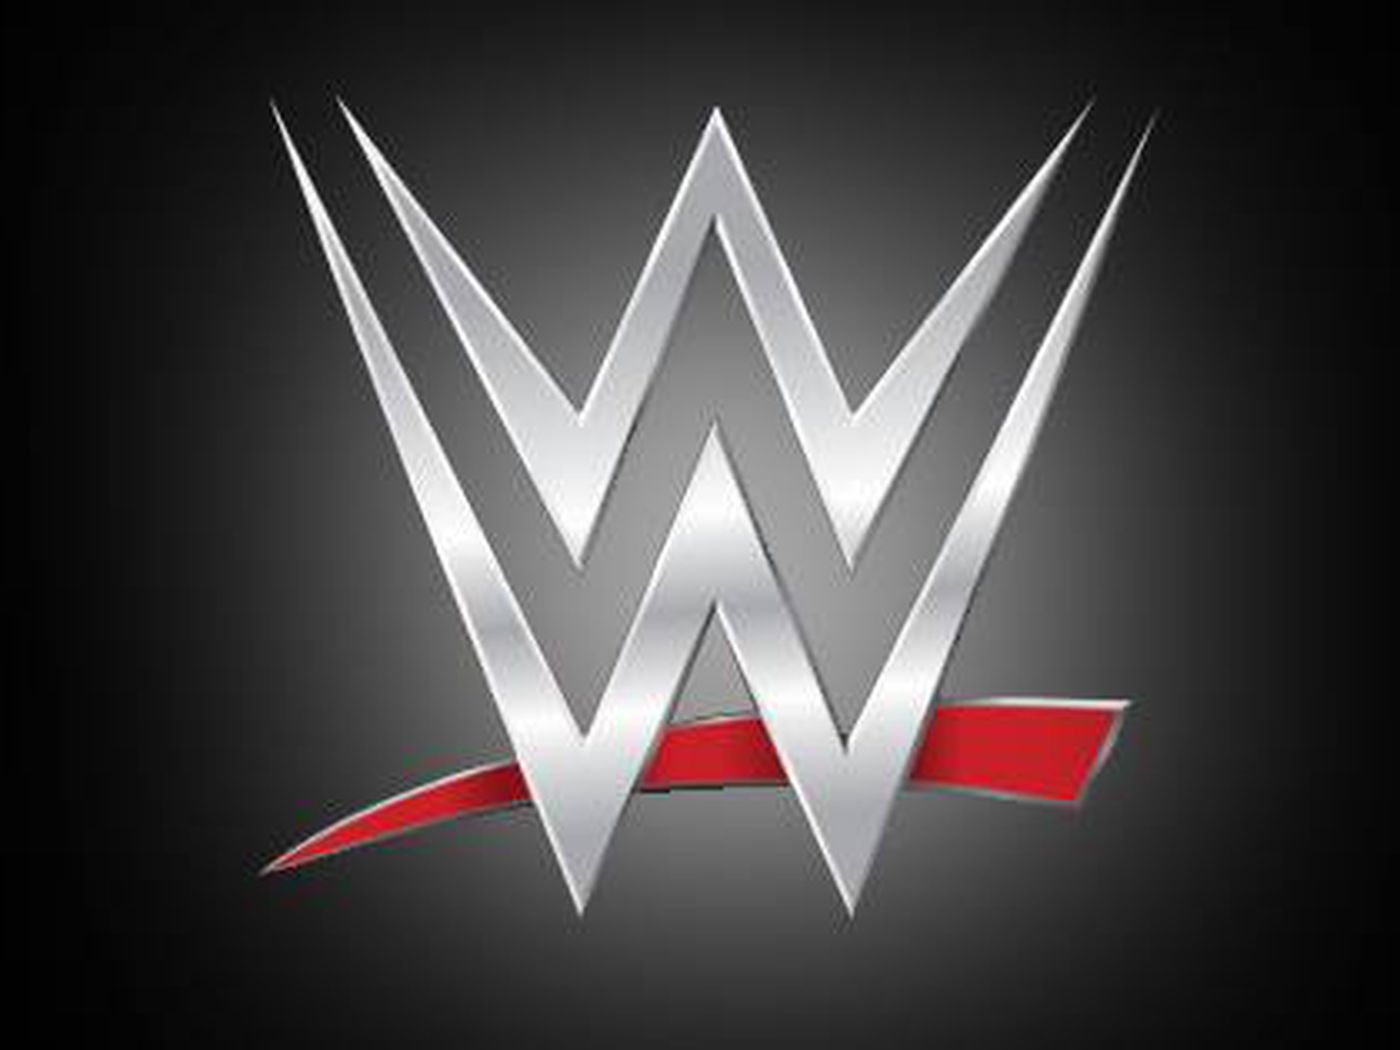 Creative writing role for WWE’s women’s division may change